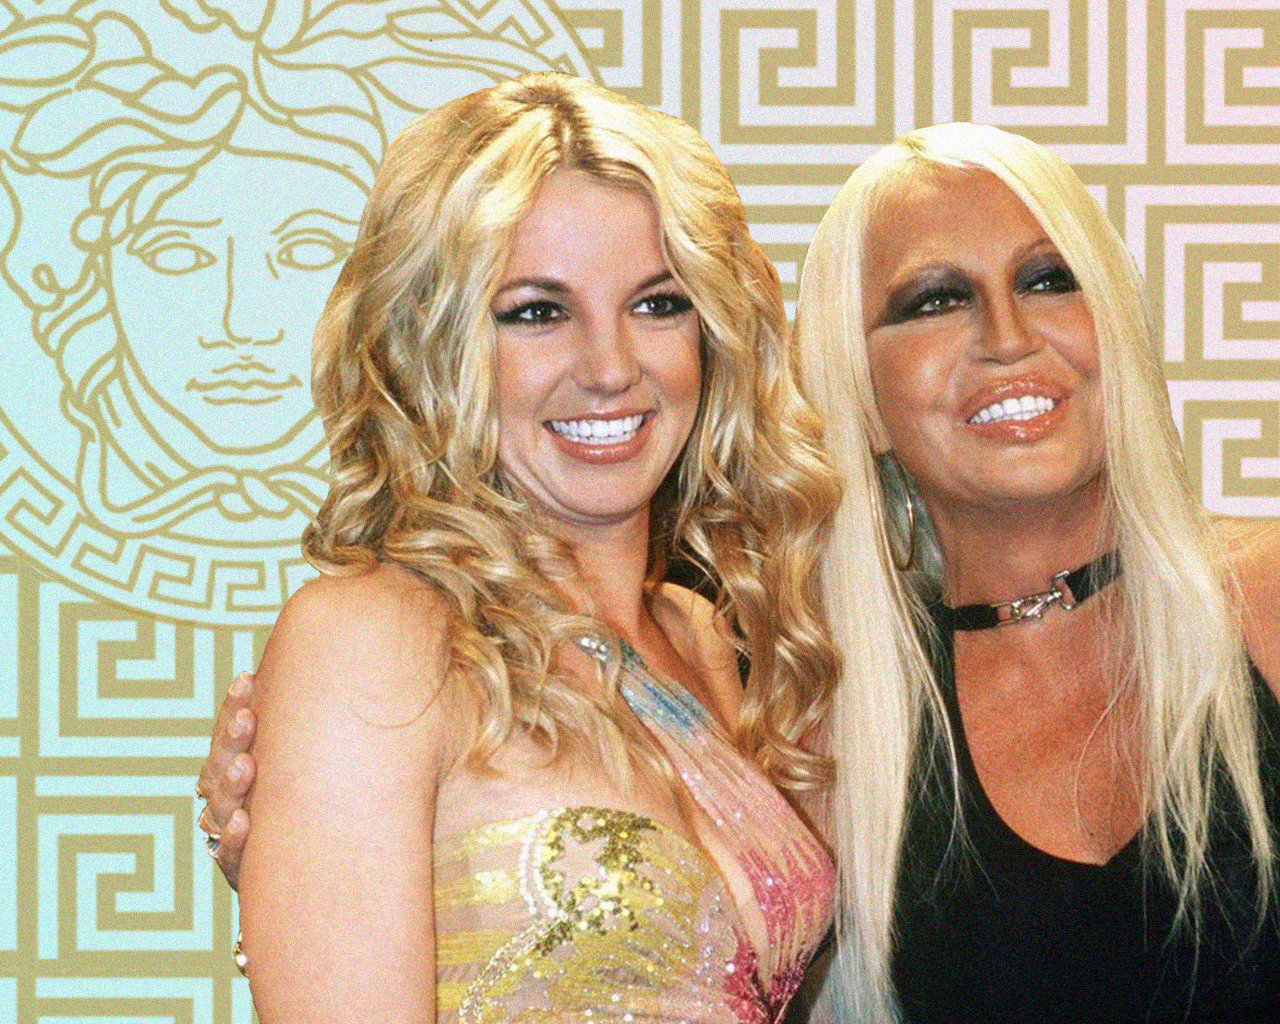 Britney Spears Is in an Amazing State of Mind, Says Donatella Versace